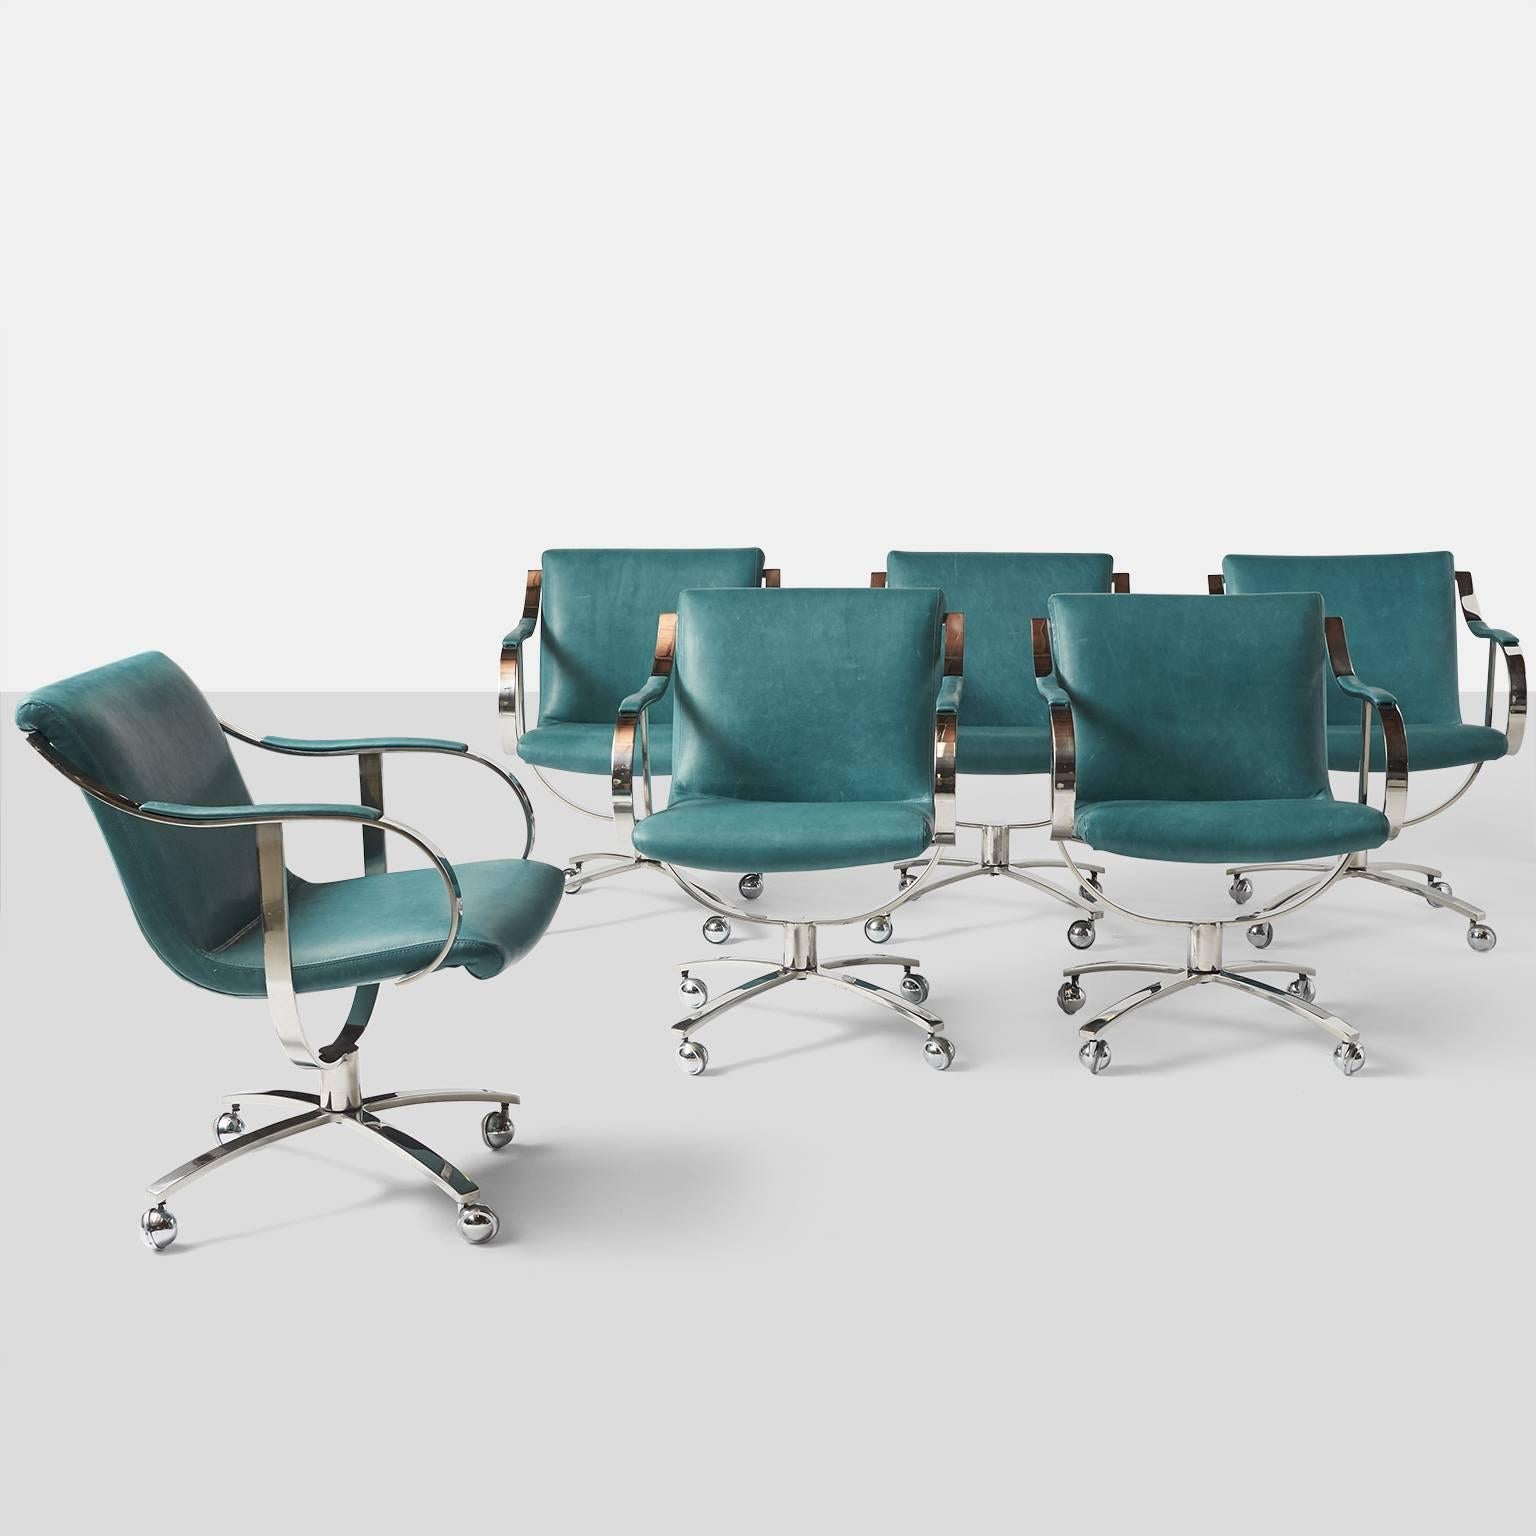 A set of six swivel chairs series #455 restored in a blue leather on chromed steel frames and four castered legs.
USA, circa 1970s.